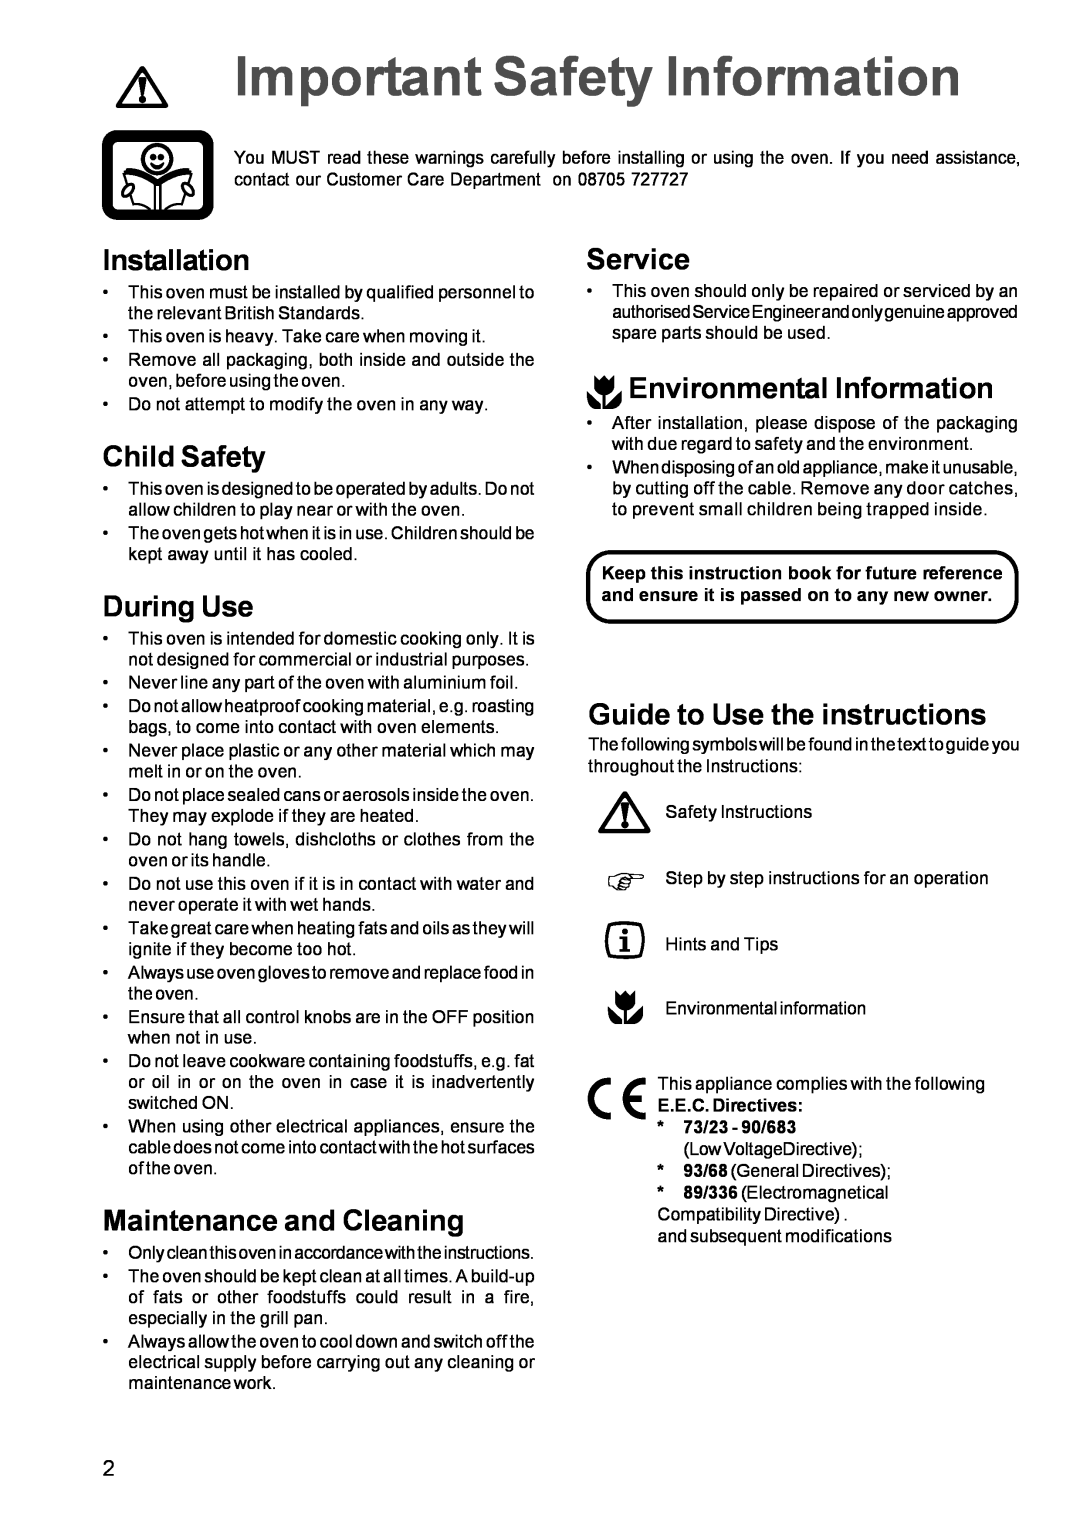 Zanussi ZBM 972 Important Safety Information, Installation, Child Safety, During Use, Maintenance and Cleaning, Service 